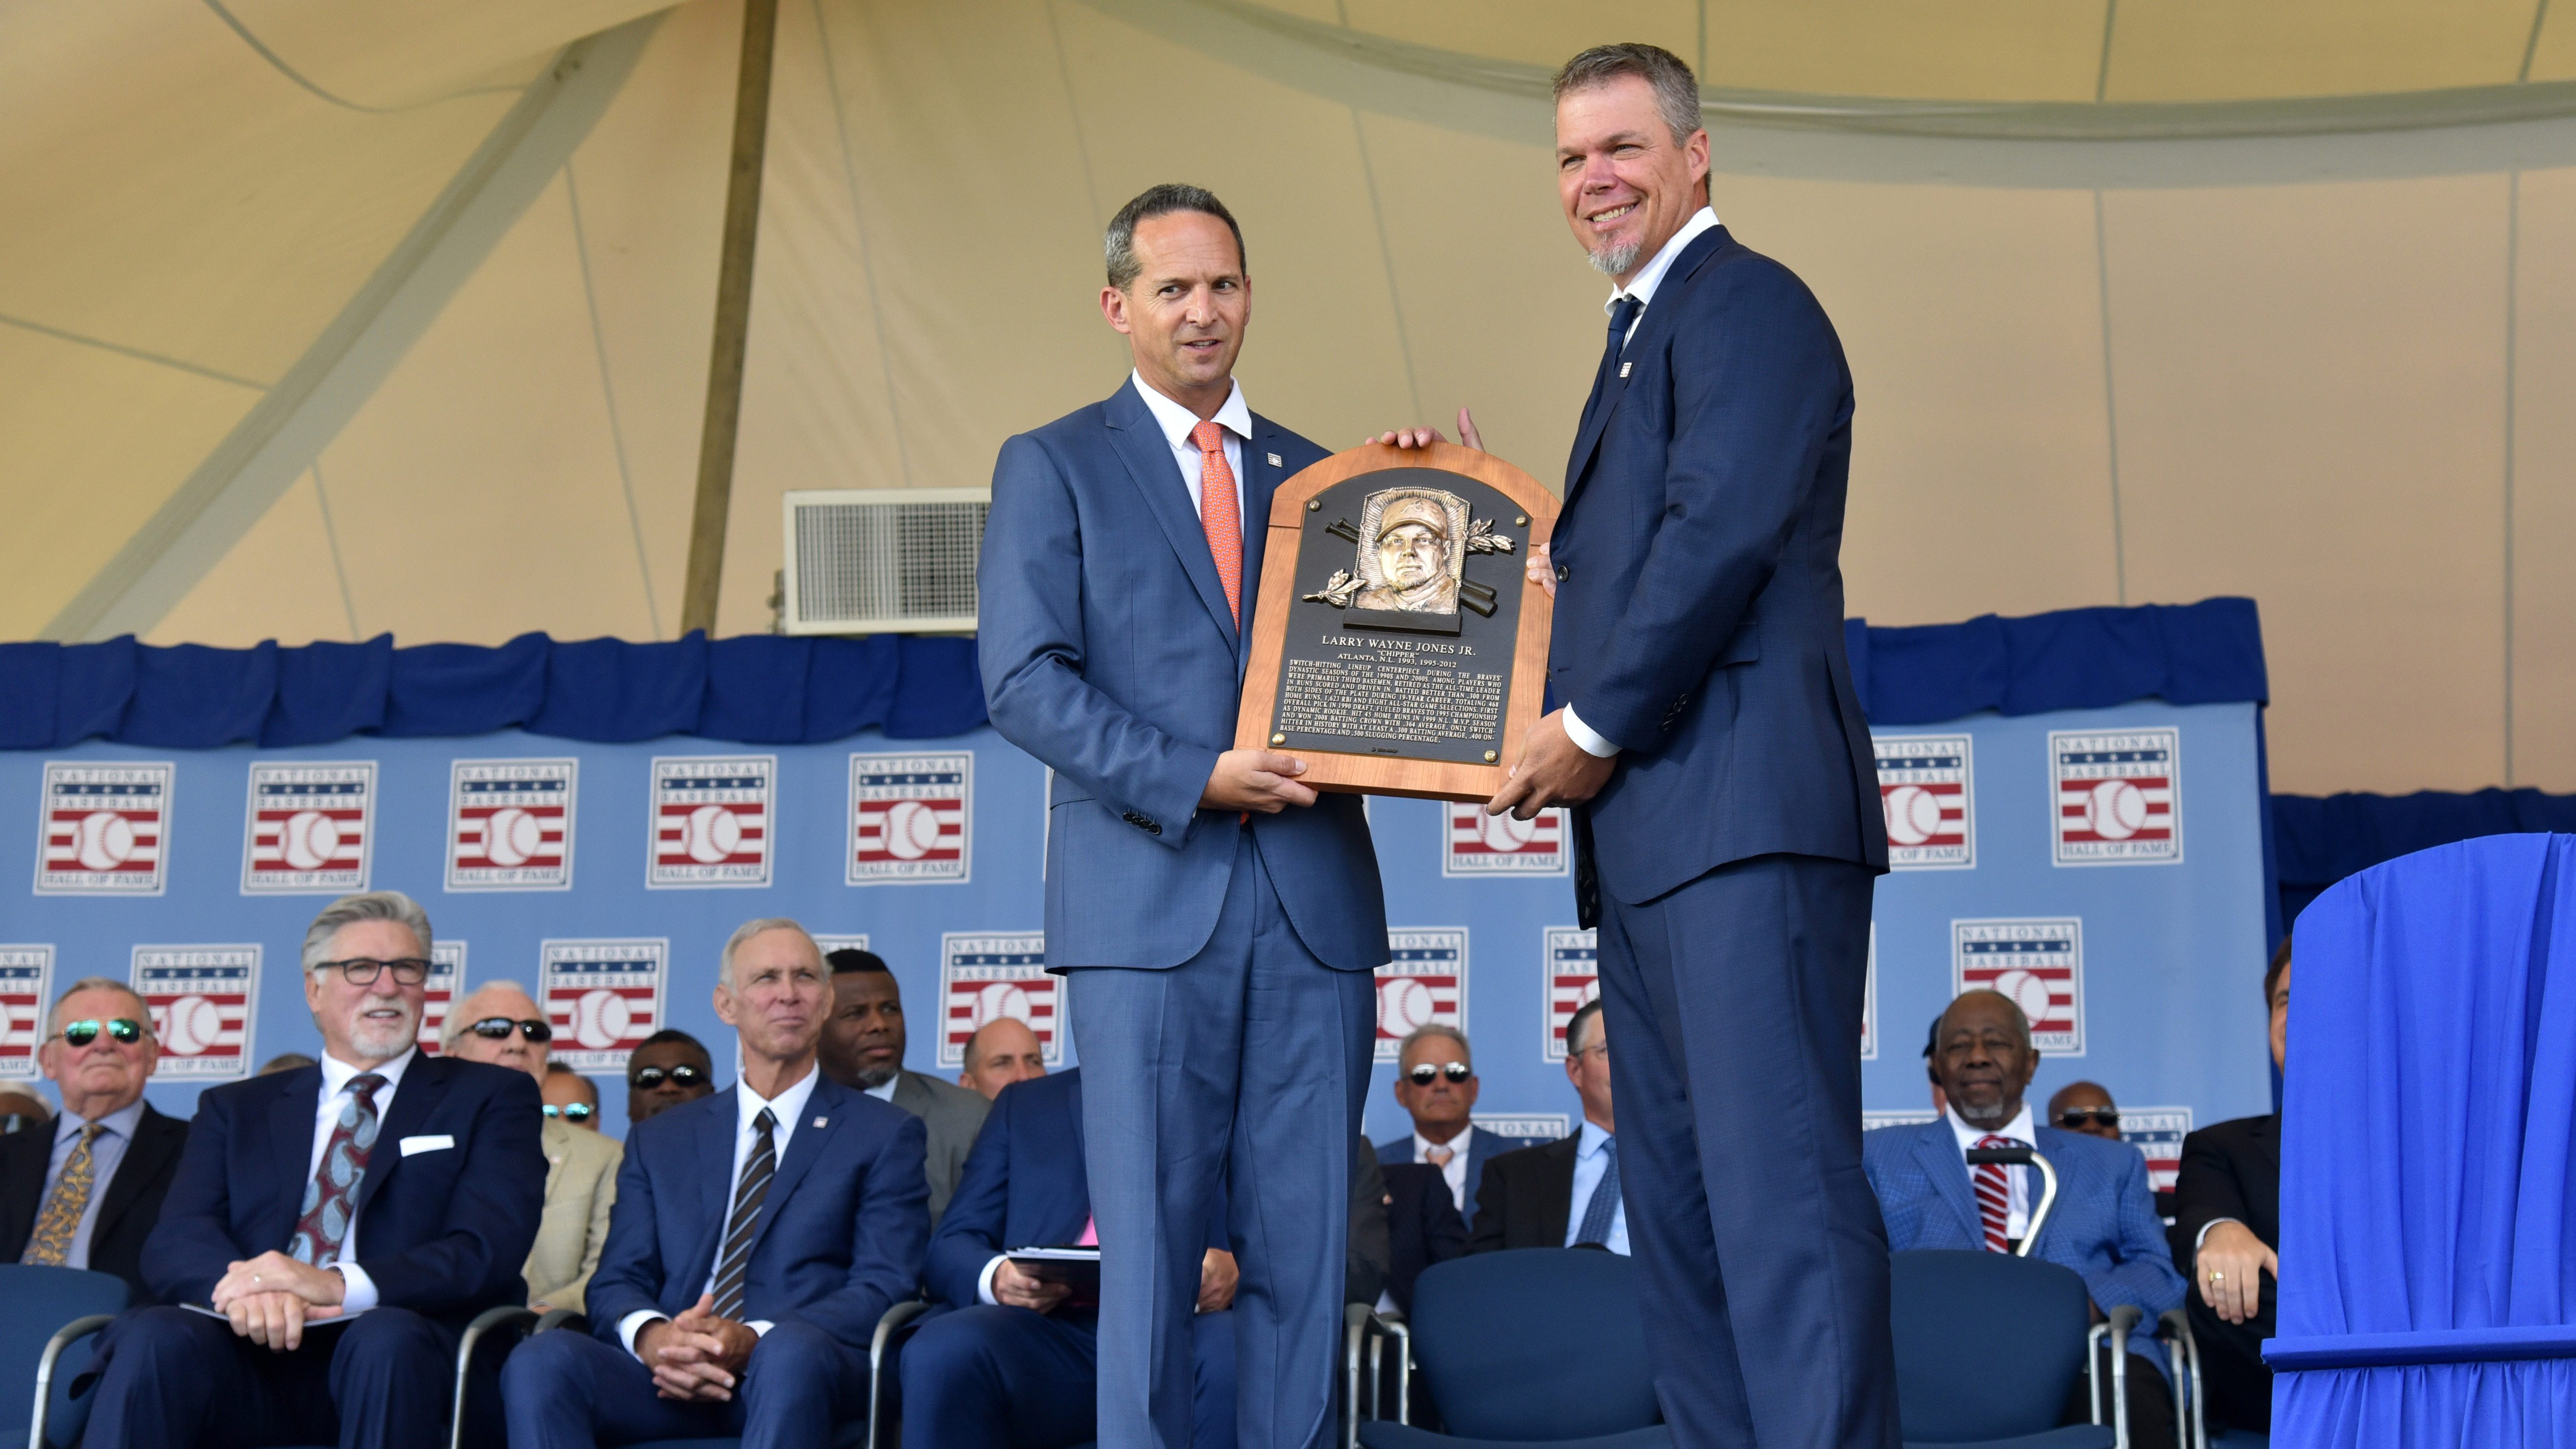 In their words: Examining Hall of Famer and Braves icon Chipper